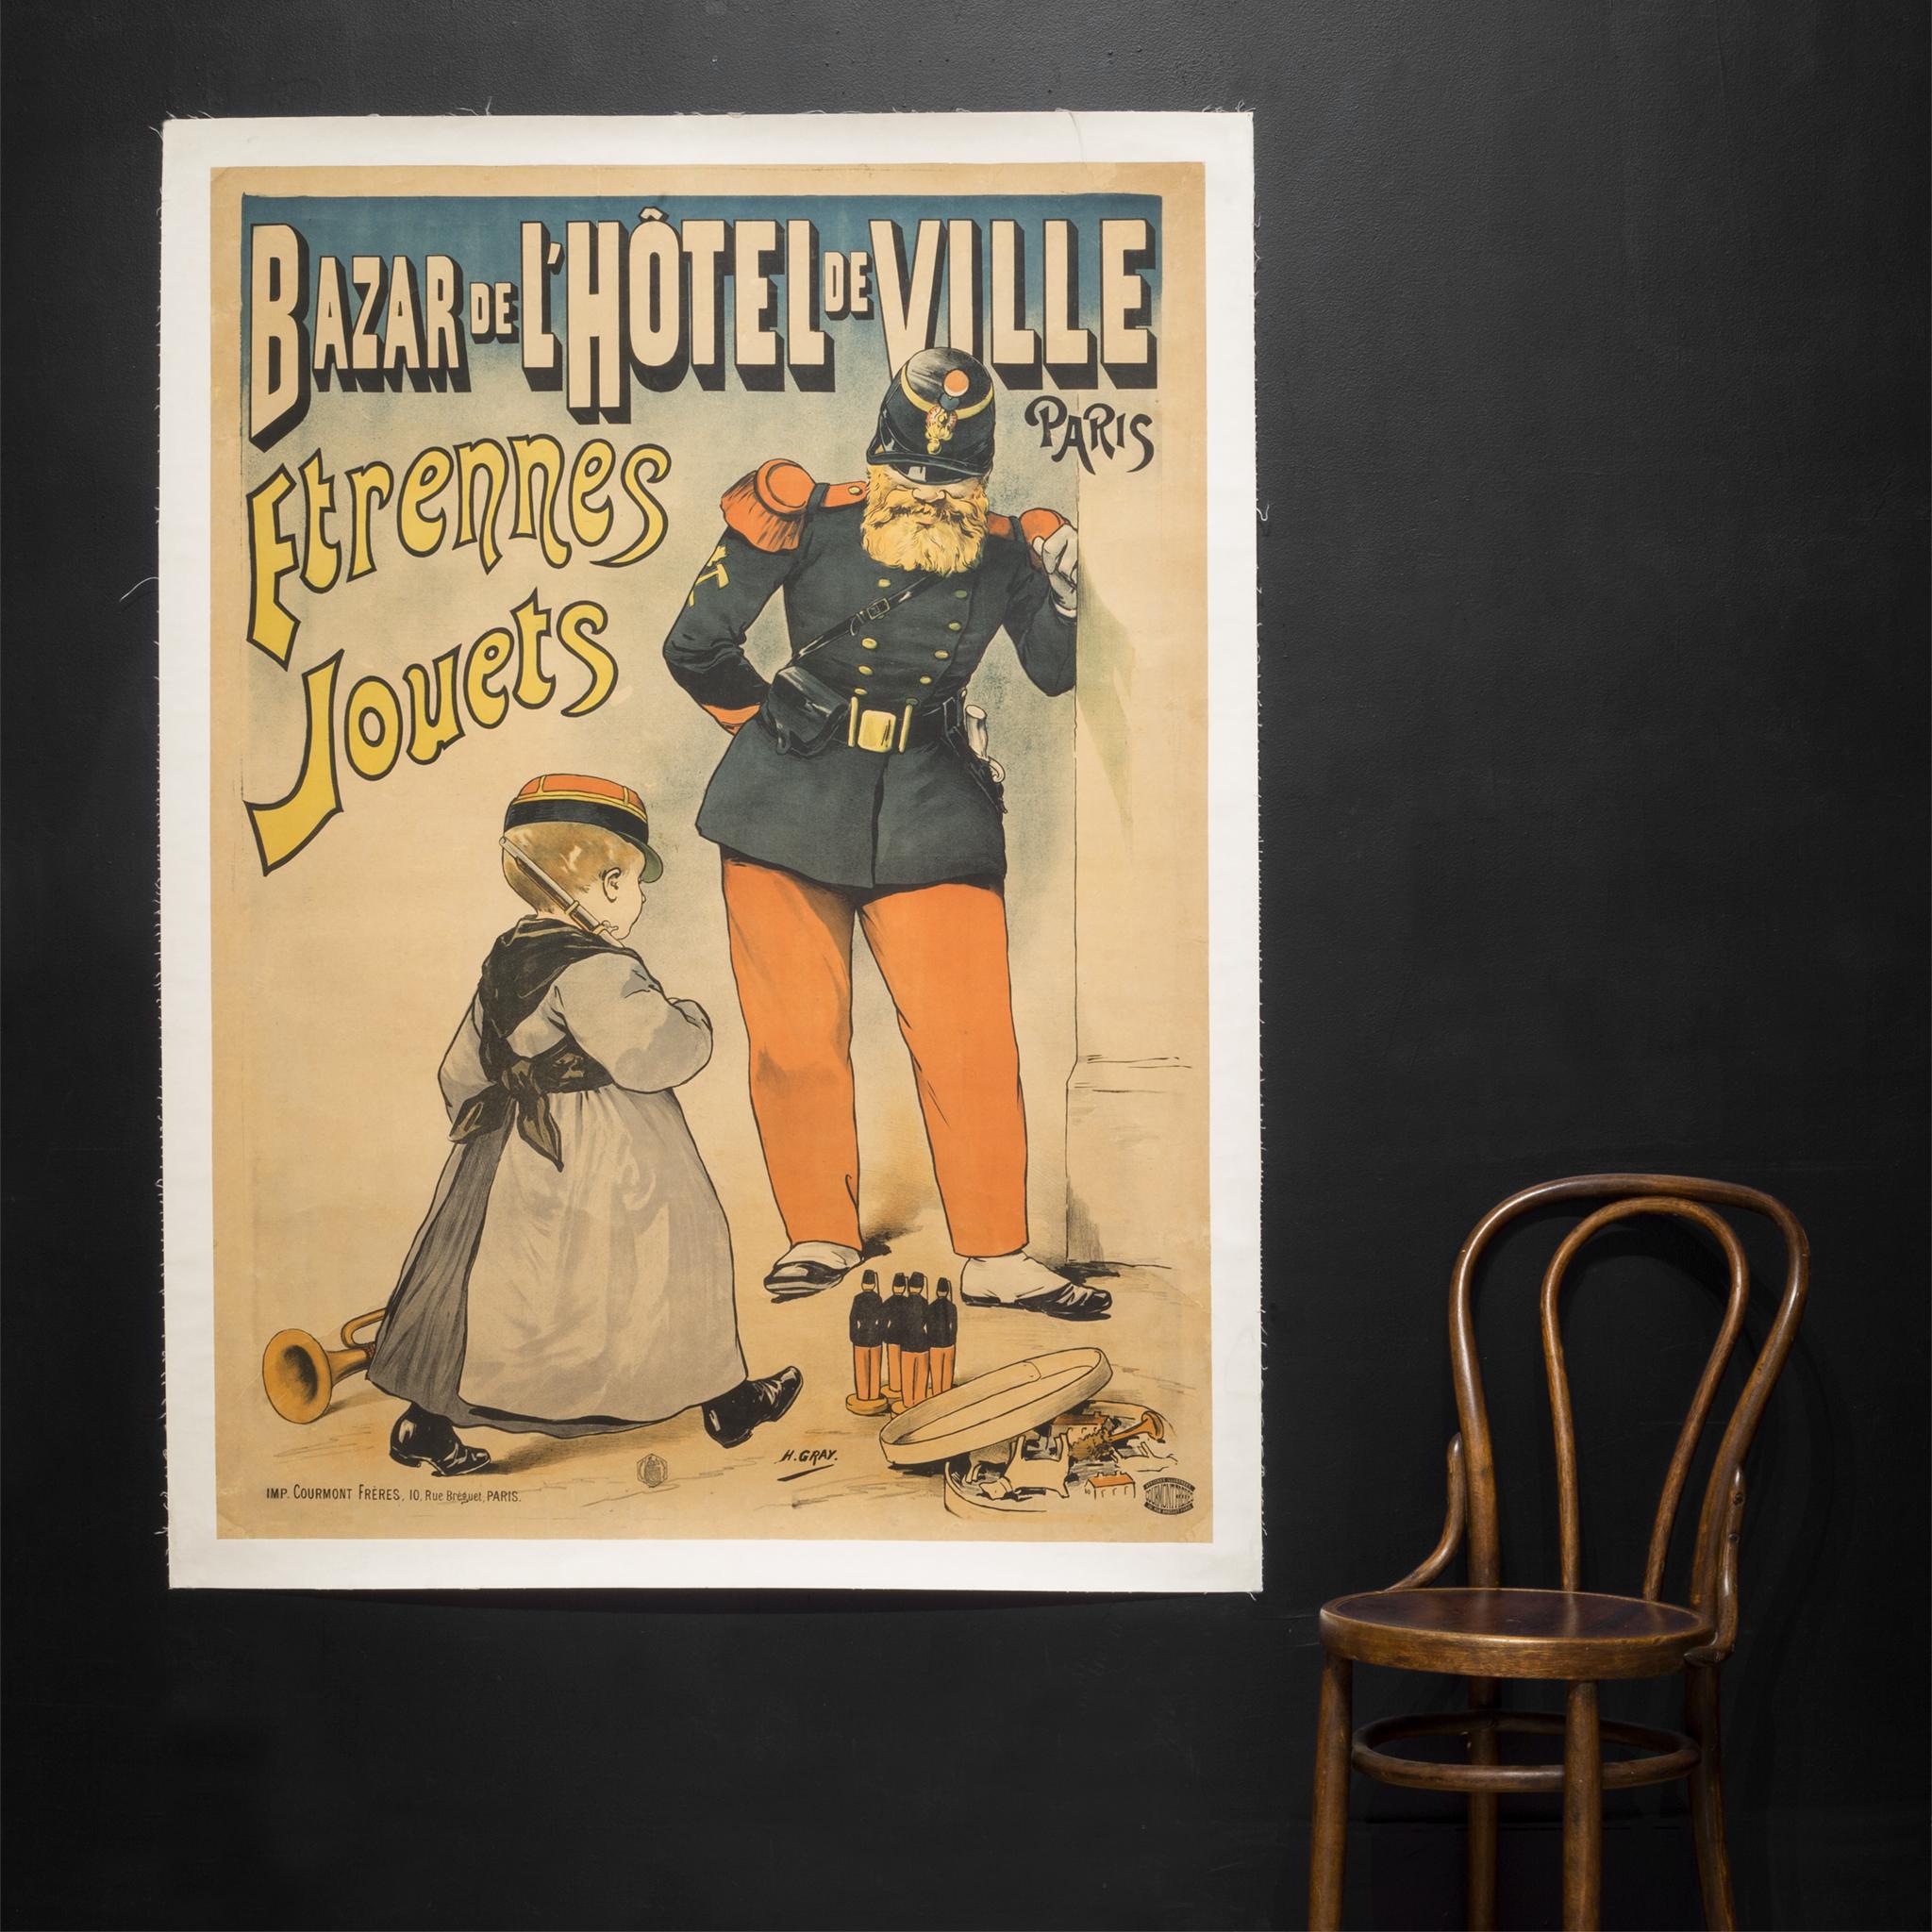 About

This is an original vintage lithograph poster depicting the sale of toys and New Year's gifts at the Bazar of the City Hall of Paris. This poster is not a reproduction. It is conservation mounted, linen backed, and in excellent